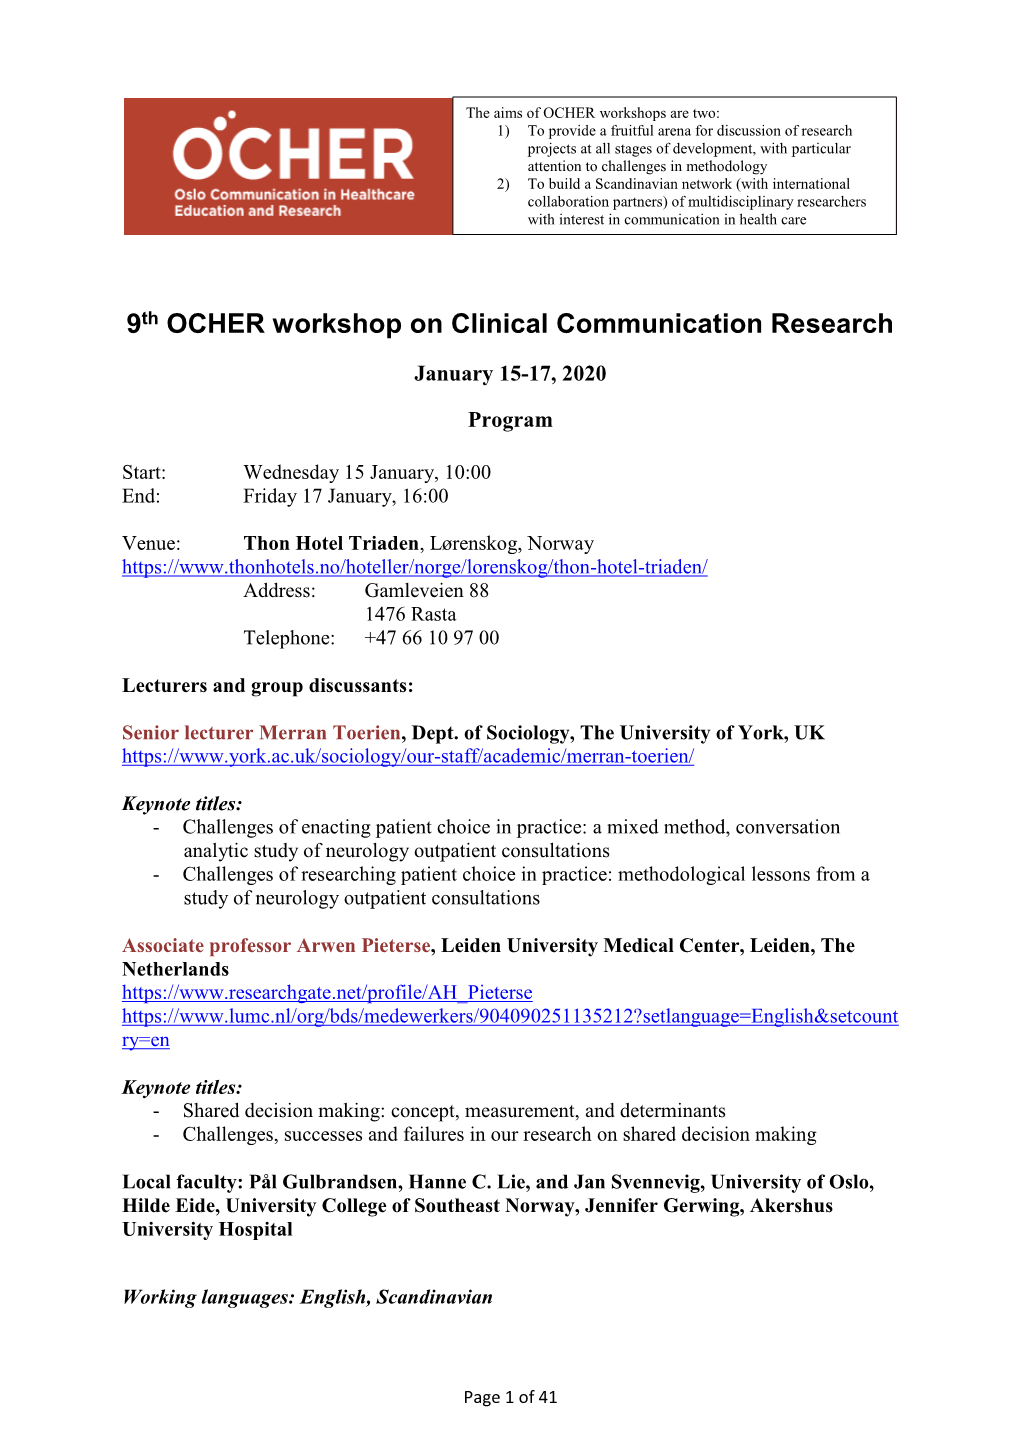 9Th OCHER Workshop on Clinical Communication Research